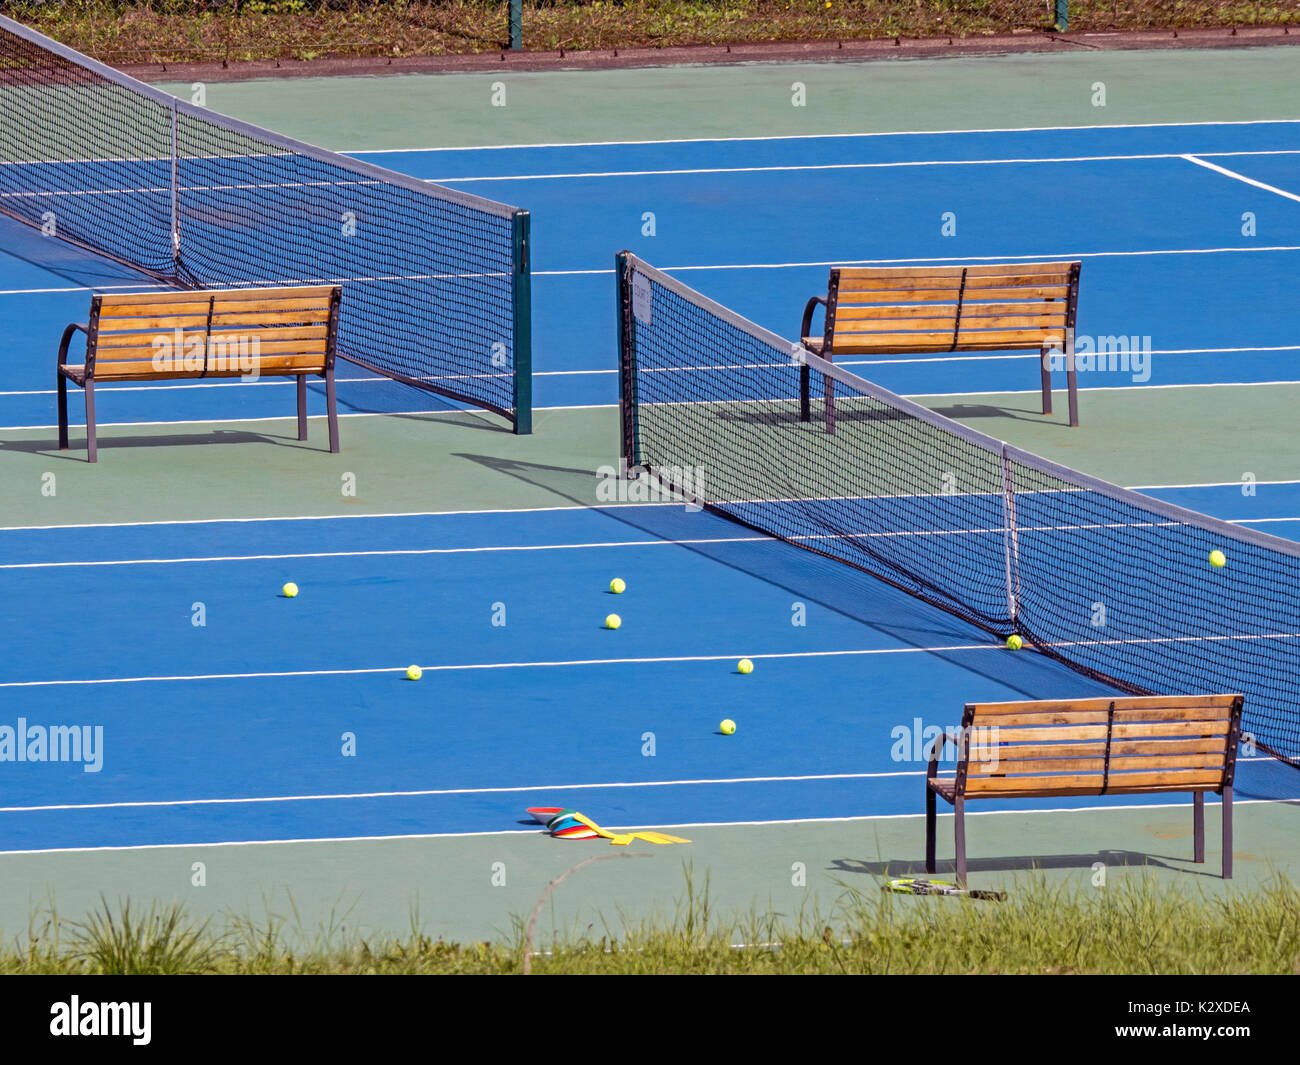 Blue surfaced tennis court with yellow balls during coaching session Stock Photo